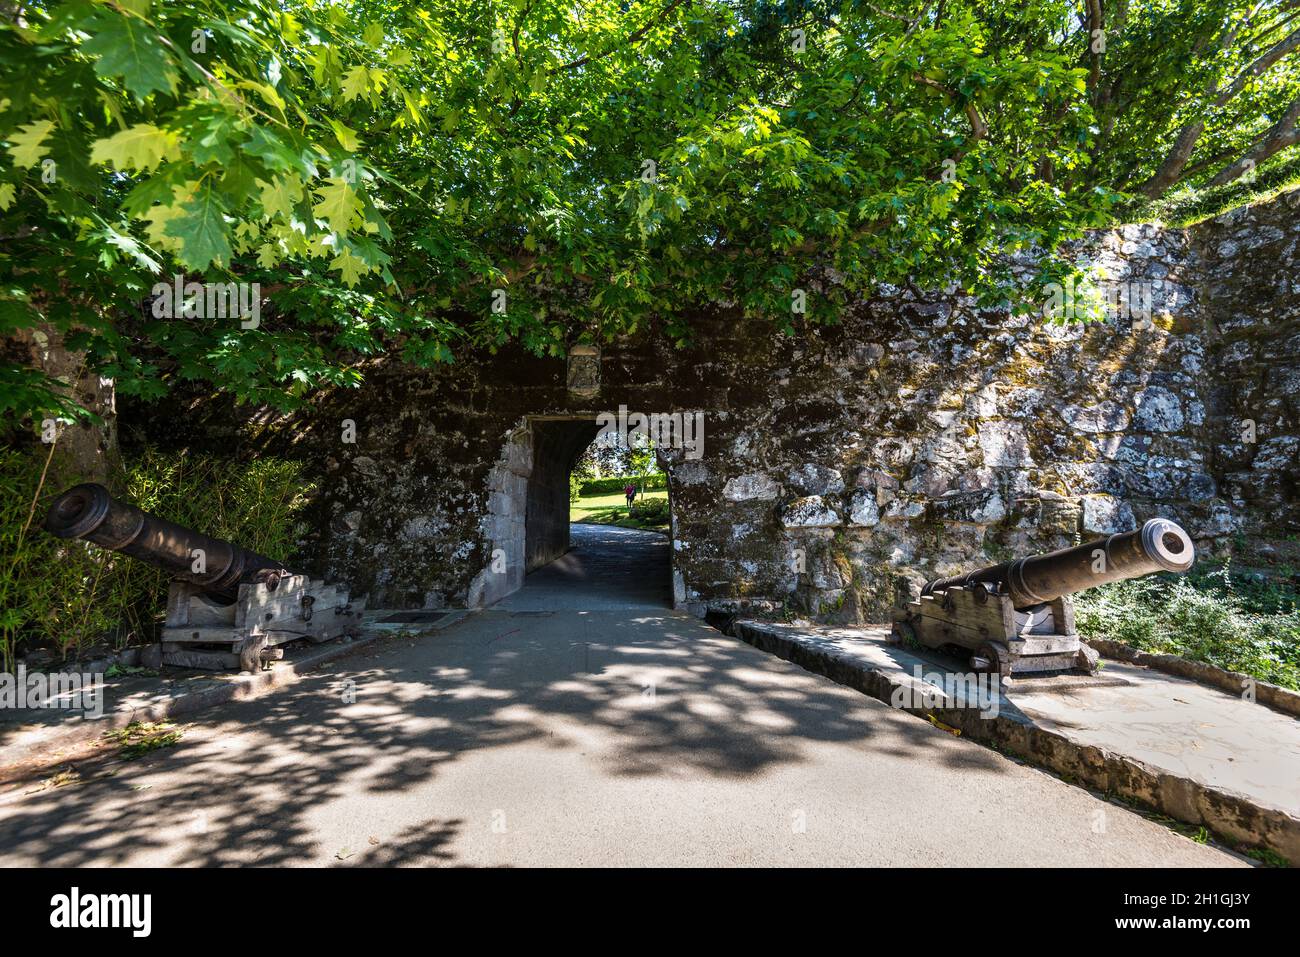 Vigo, Spain - May 20, 2017: Scenic view of two cannons and entrance in brick wall of old fortress in ancient historic spanish town Vigo in Galicia, Sp Stock Photo